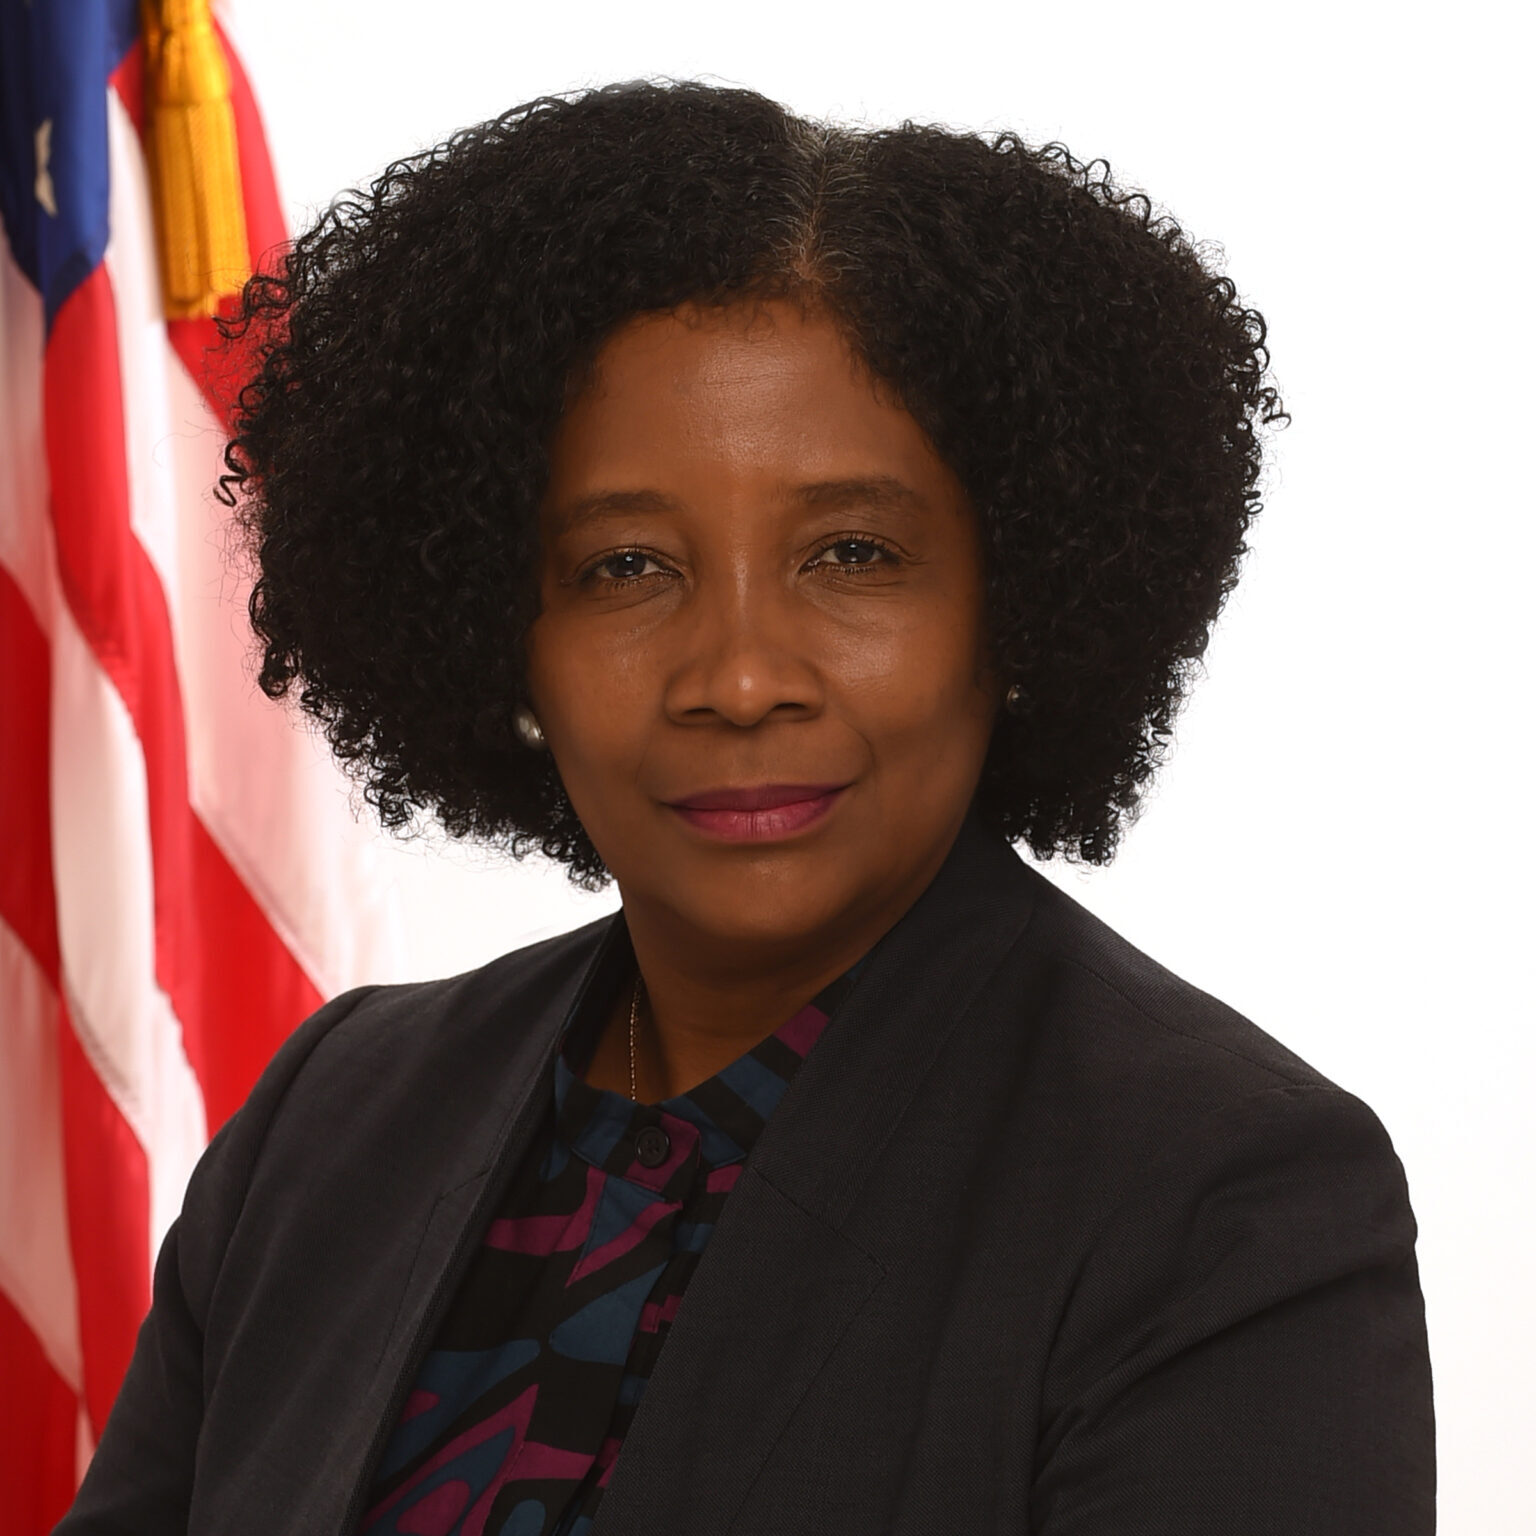 Aysha Schomburg, associate commissioner in the Children's Bureau in the Administration on Children, Youth and Families with American flag in the background.